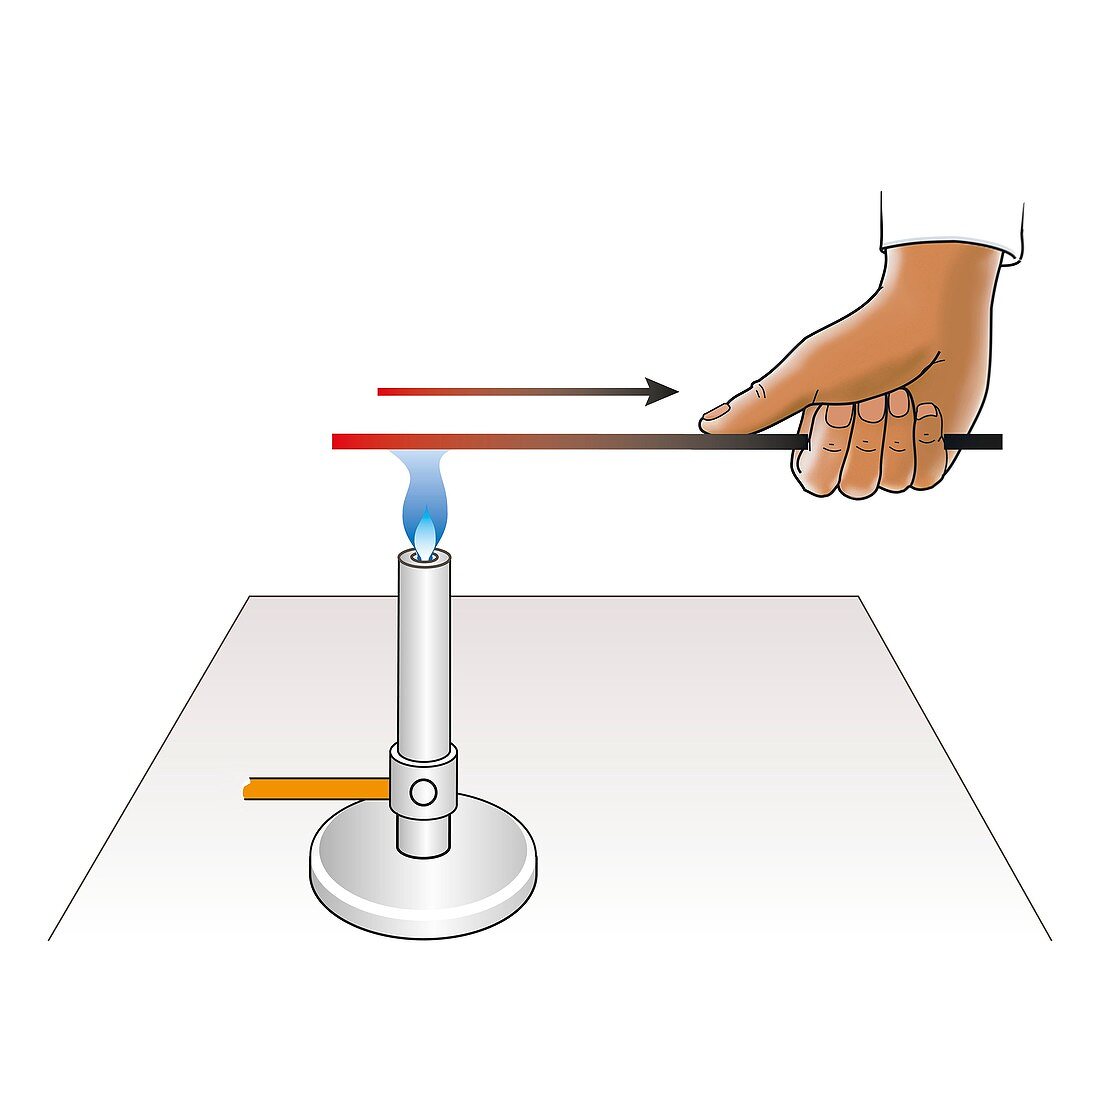 Thermal conduction in a metal, illustration